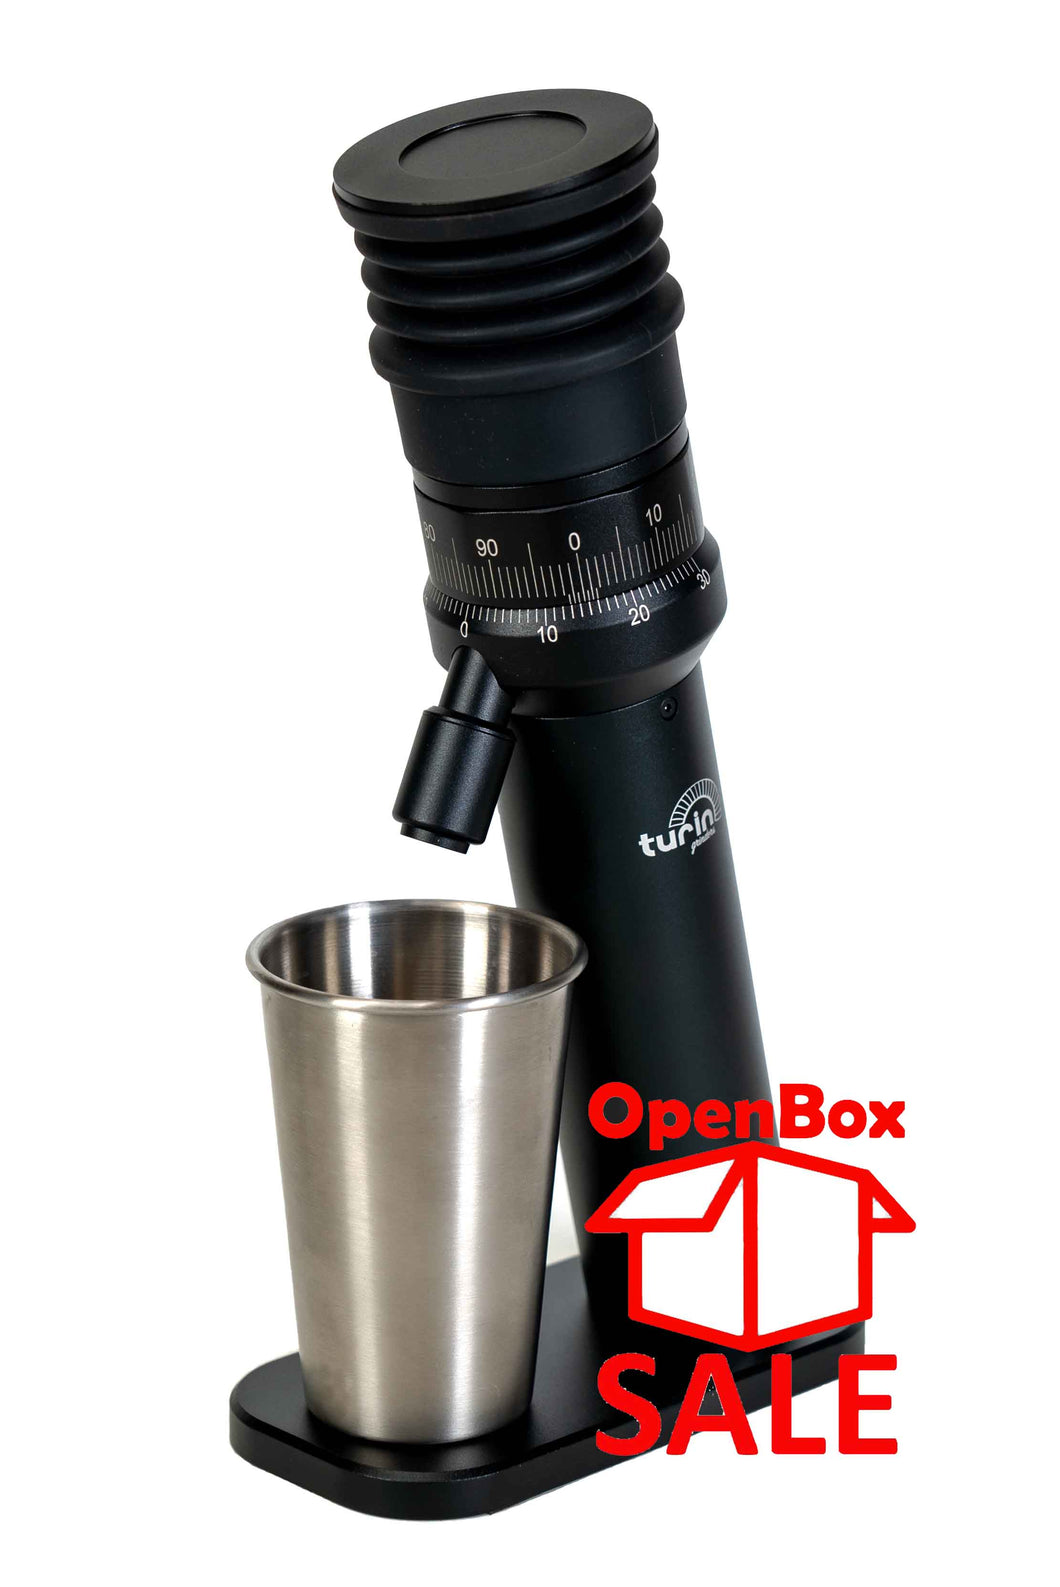 OPEN BOX Turin™ DM47 Portable Single Dose Low RPM Coffee Grinder